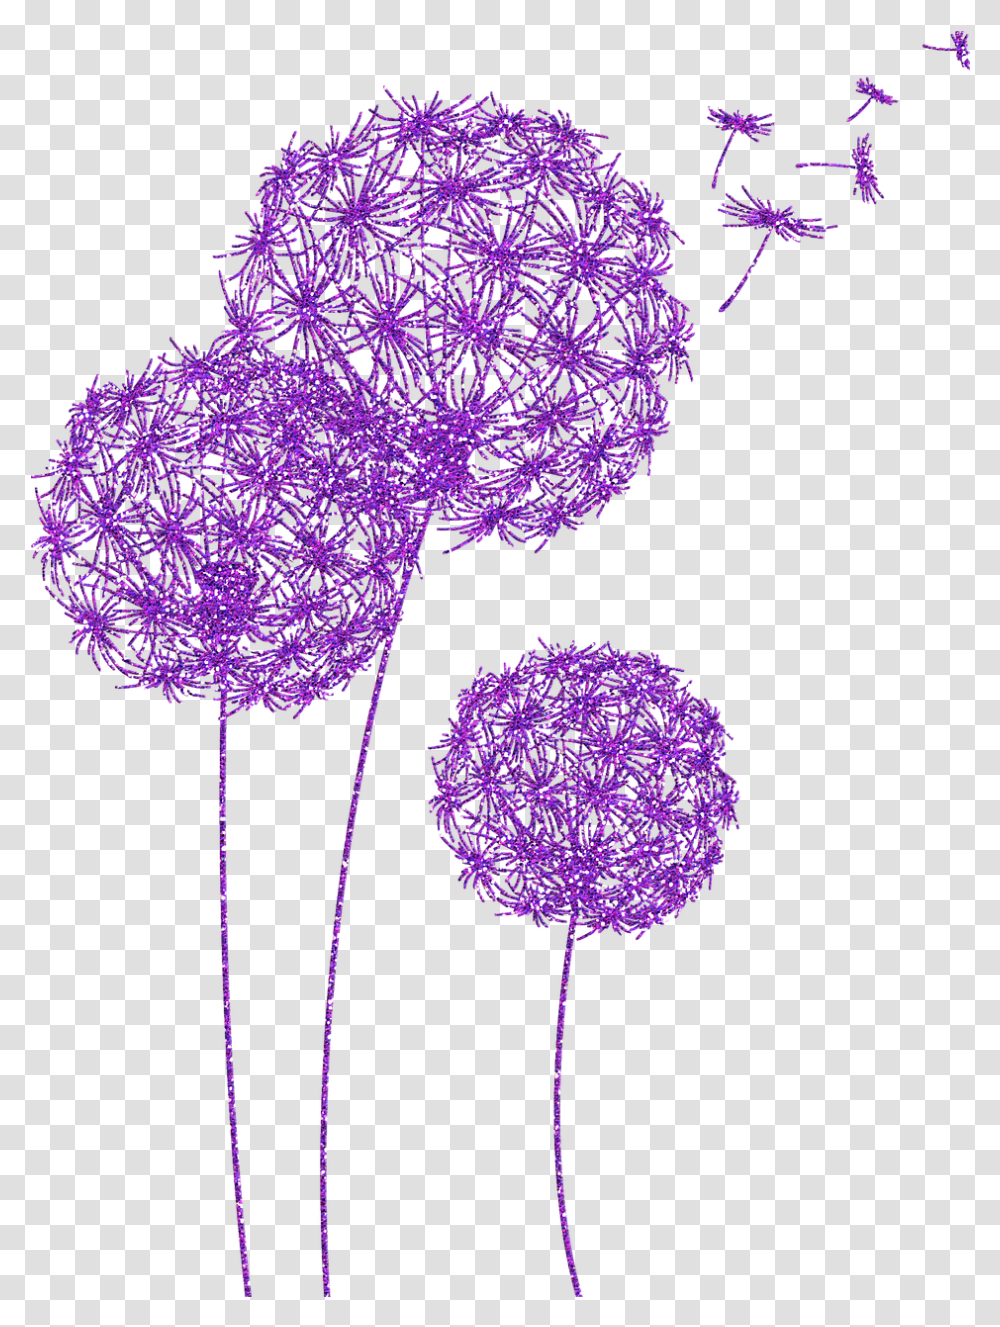 Dandelions Purple Glitter Free Image On Pixabay Purple Flower Drawing, Plant, Outdoors, Cushion, Pattern Transparent Png